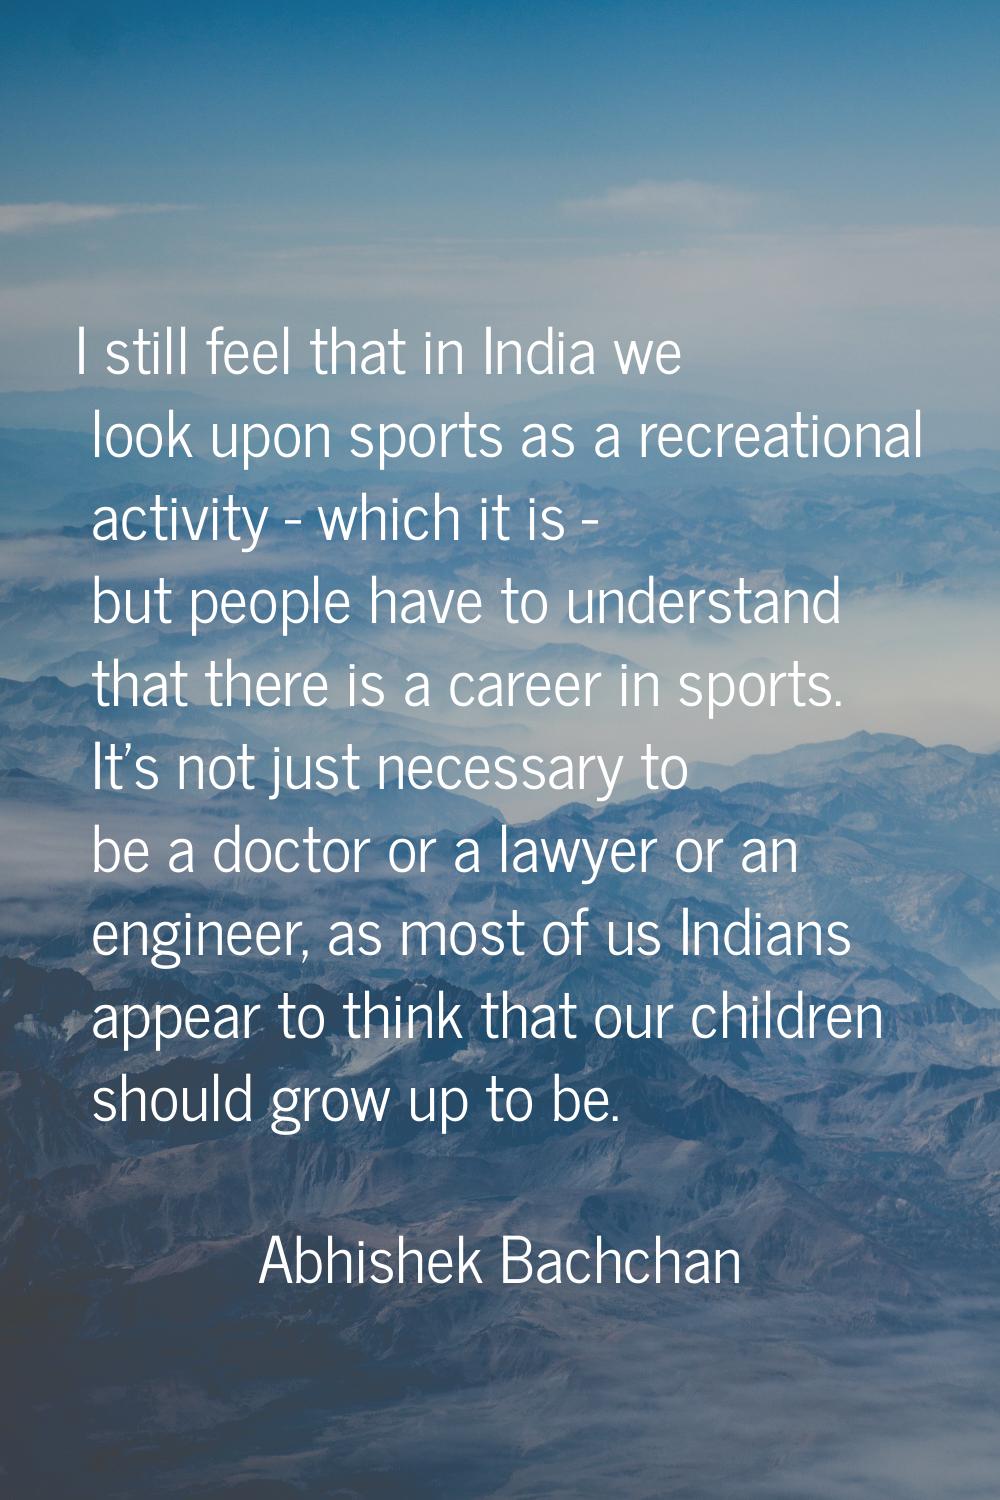 I still feel that in India we look upon sports as a recreational activity - which it is - but peopl